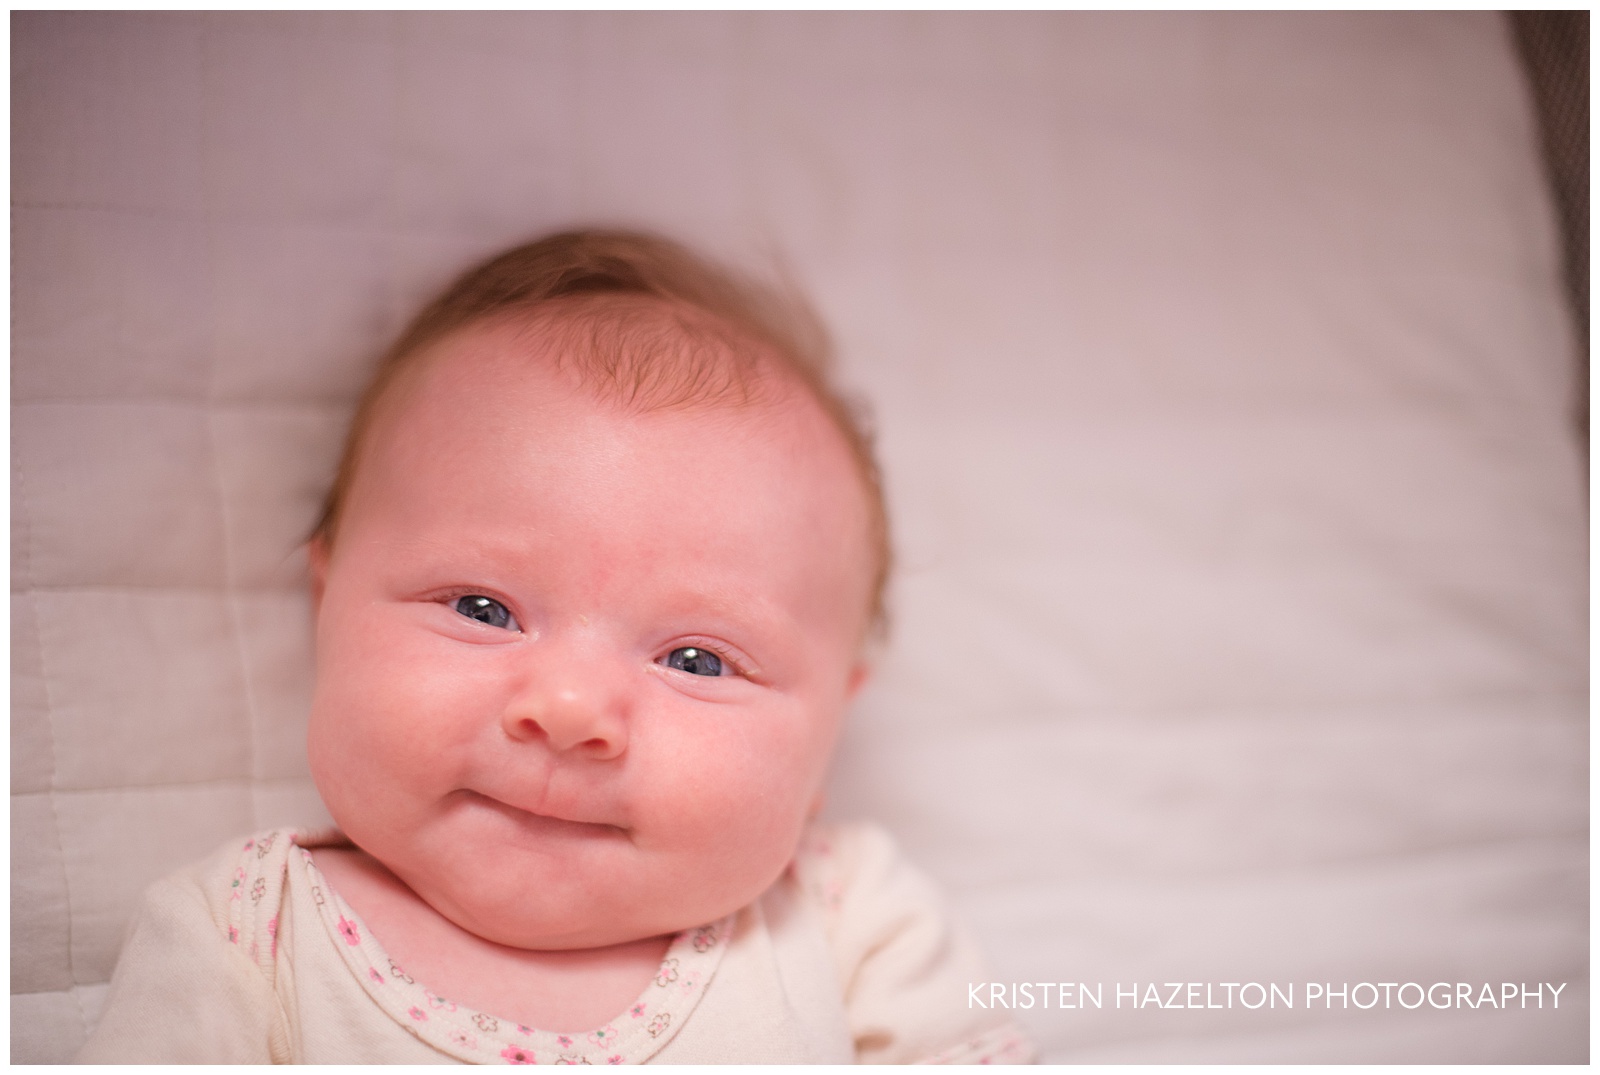 Two month old baby smiling in crib